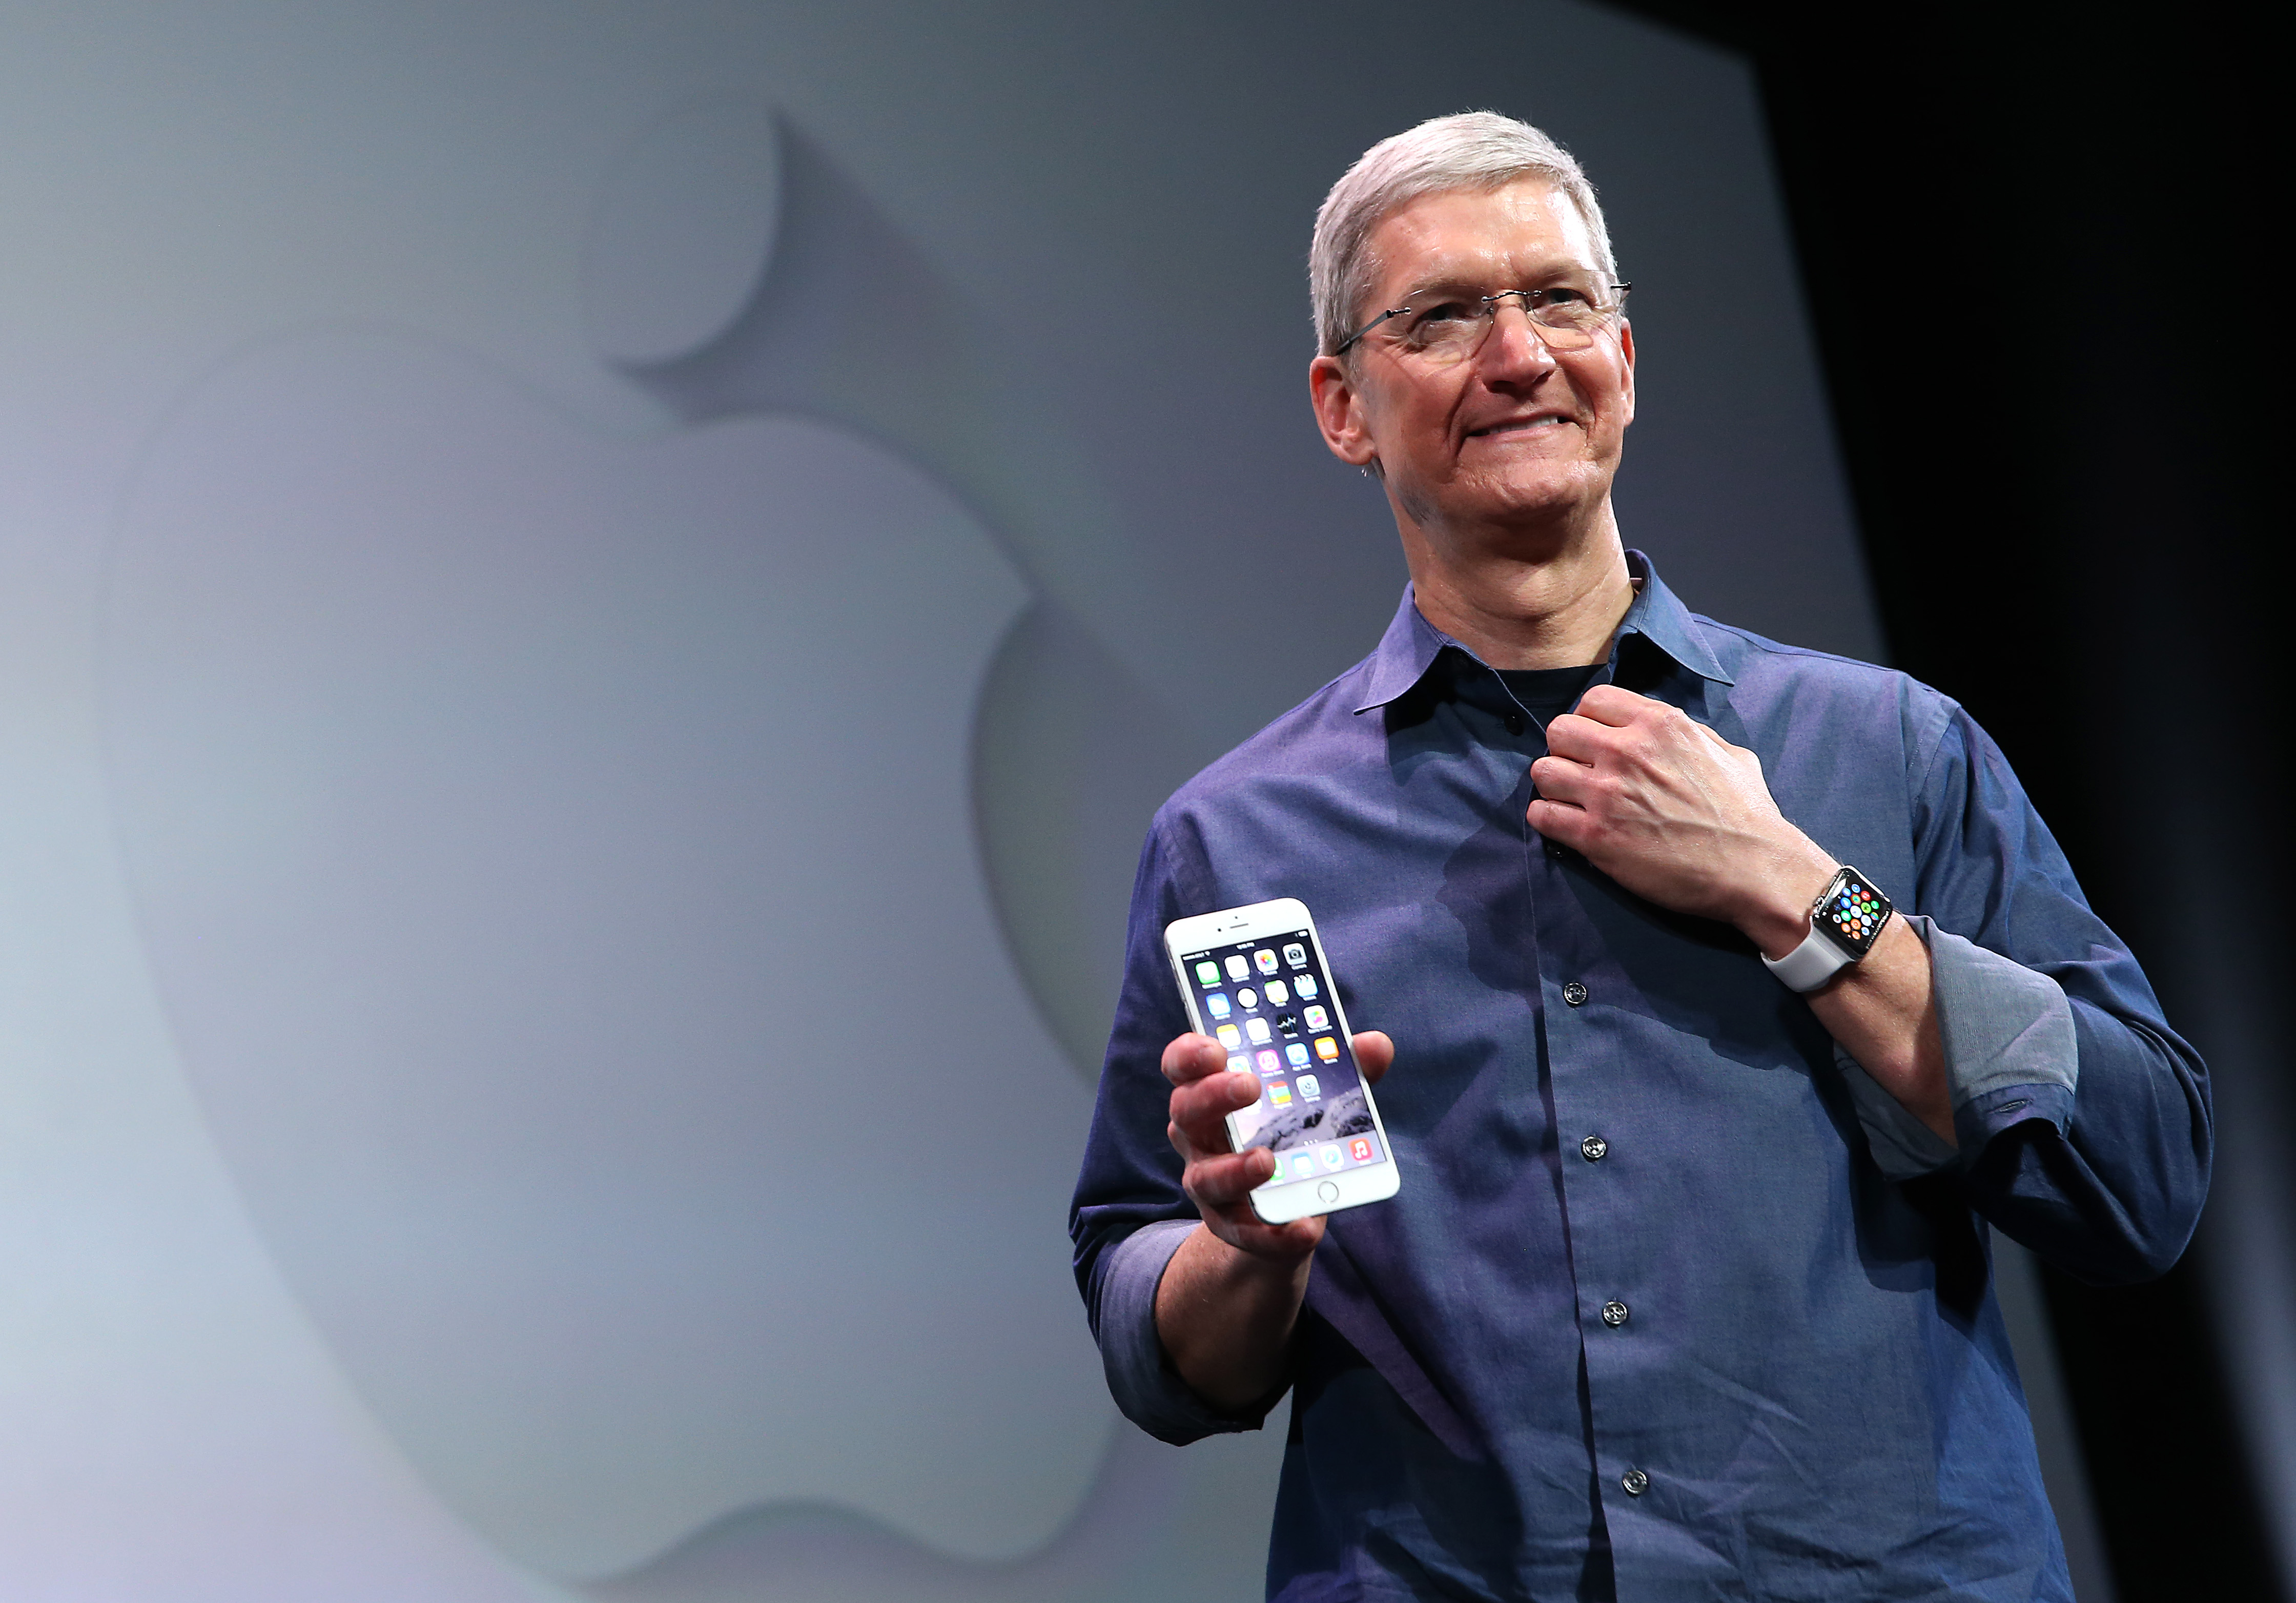 Apple CEO Tim Cook shows off the new iPhone 6 and the Apple Watch during an Apple special event at the Flint Center for the Performing Arts on Sept. 9, 2014 in Cupertino, Calif. (Justin Sullivan&mdash;Getty Images)